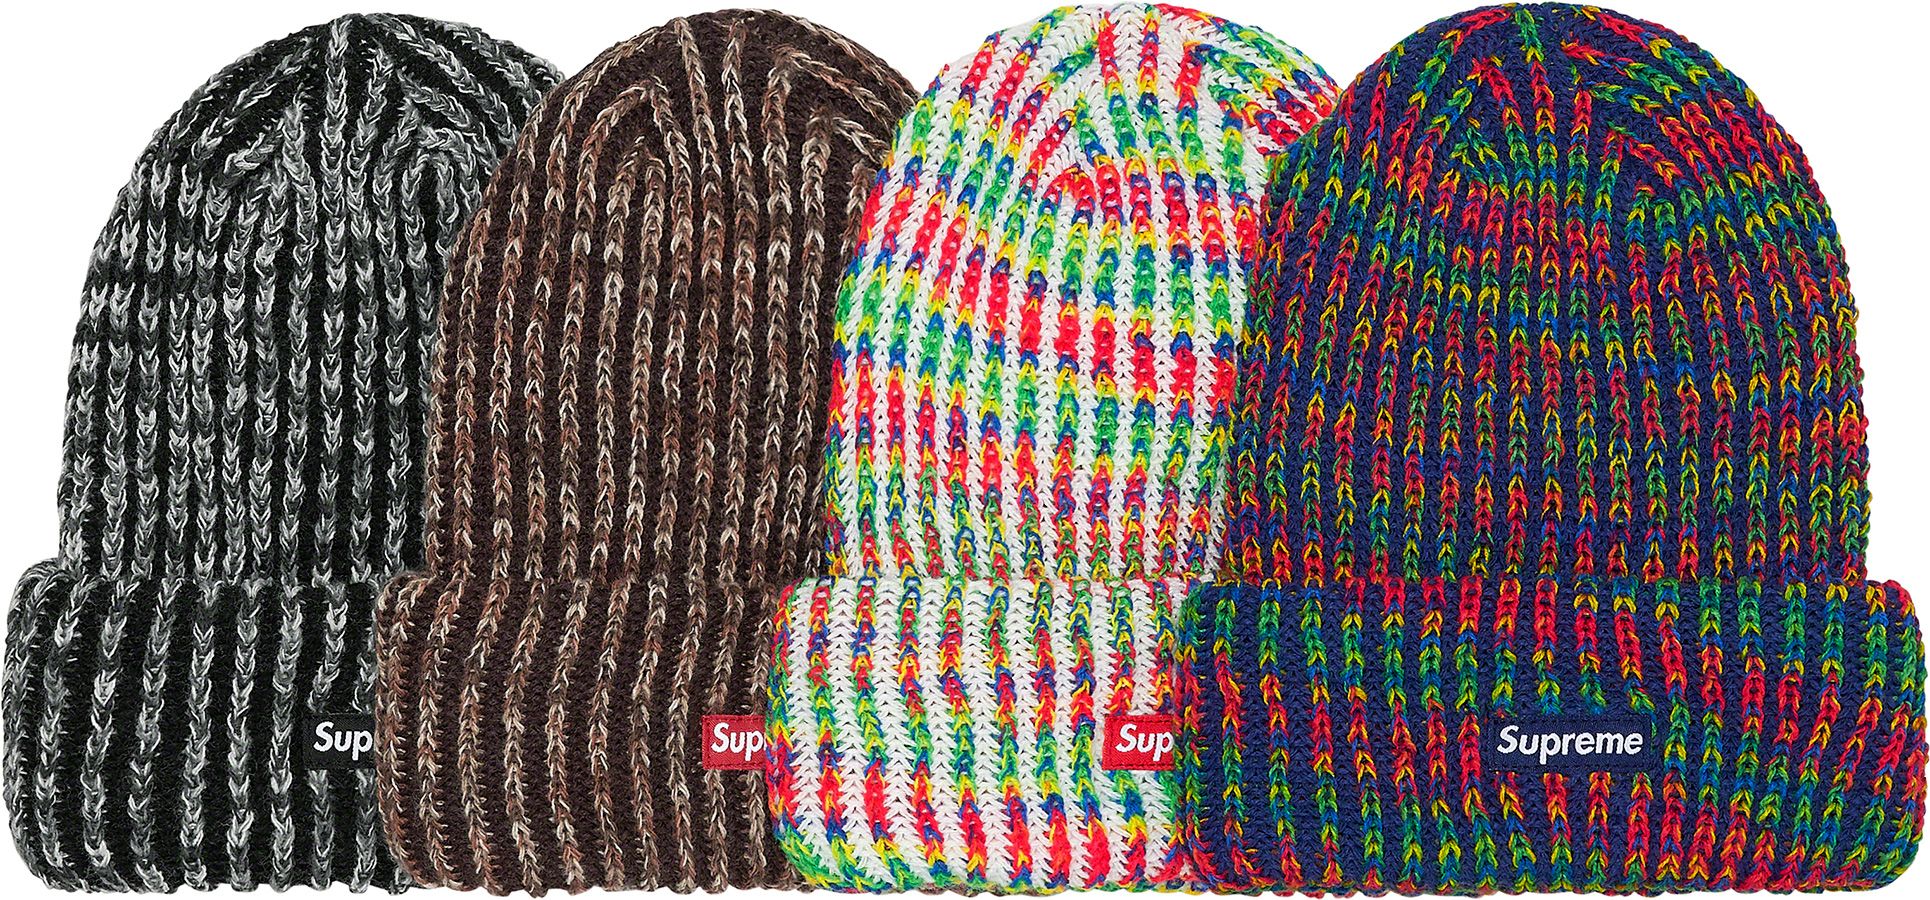 Rainbow Knit Loose Gauge Beanie - Fall/Winter 2021 Preview – Supreme